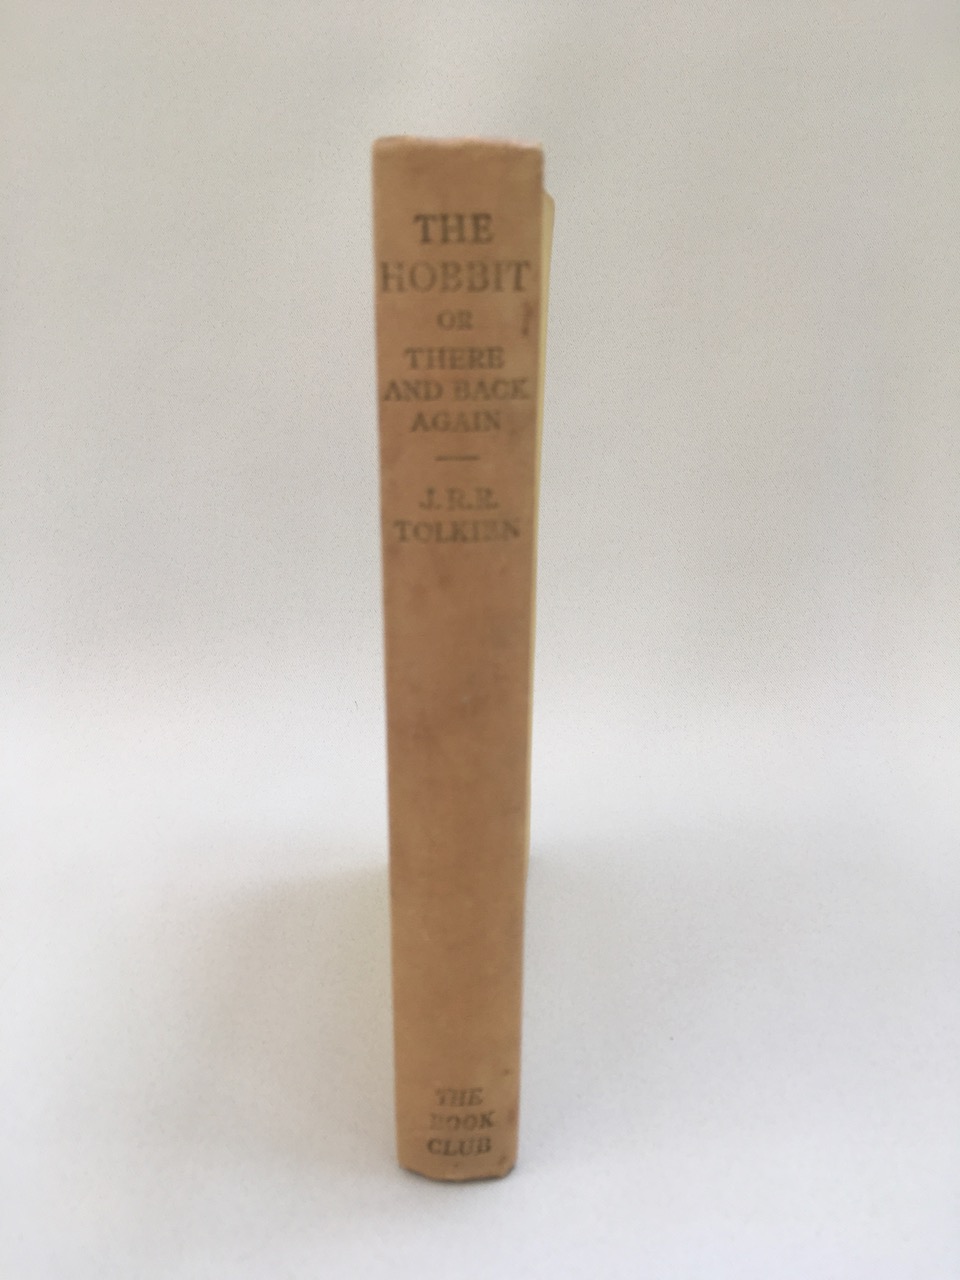 1st Book Club Edition, 1st UK 3rd impression, 1942 The Hobbit 3